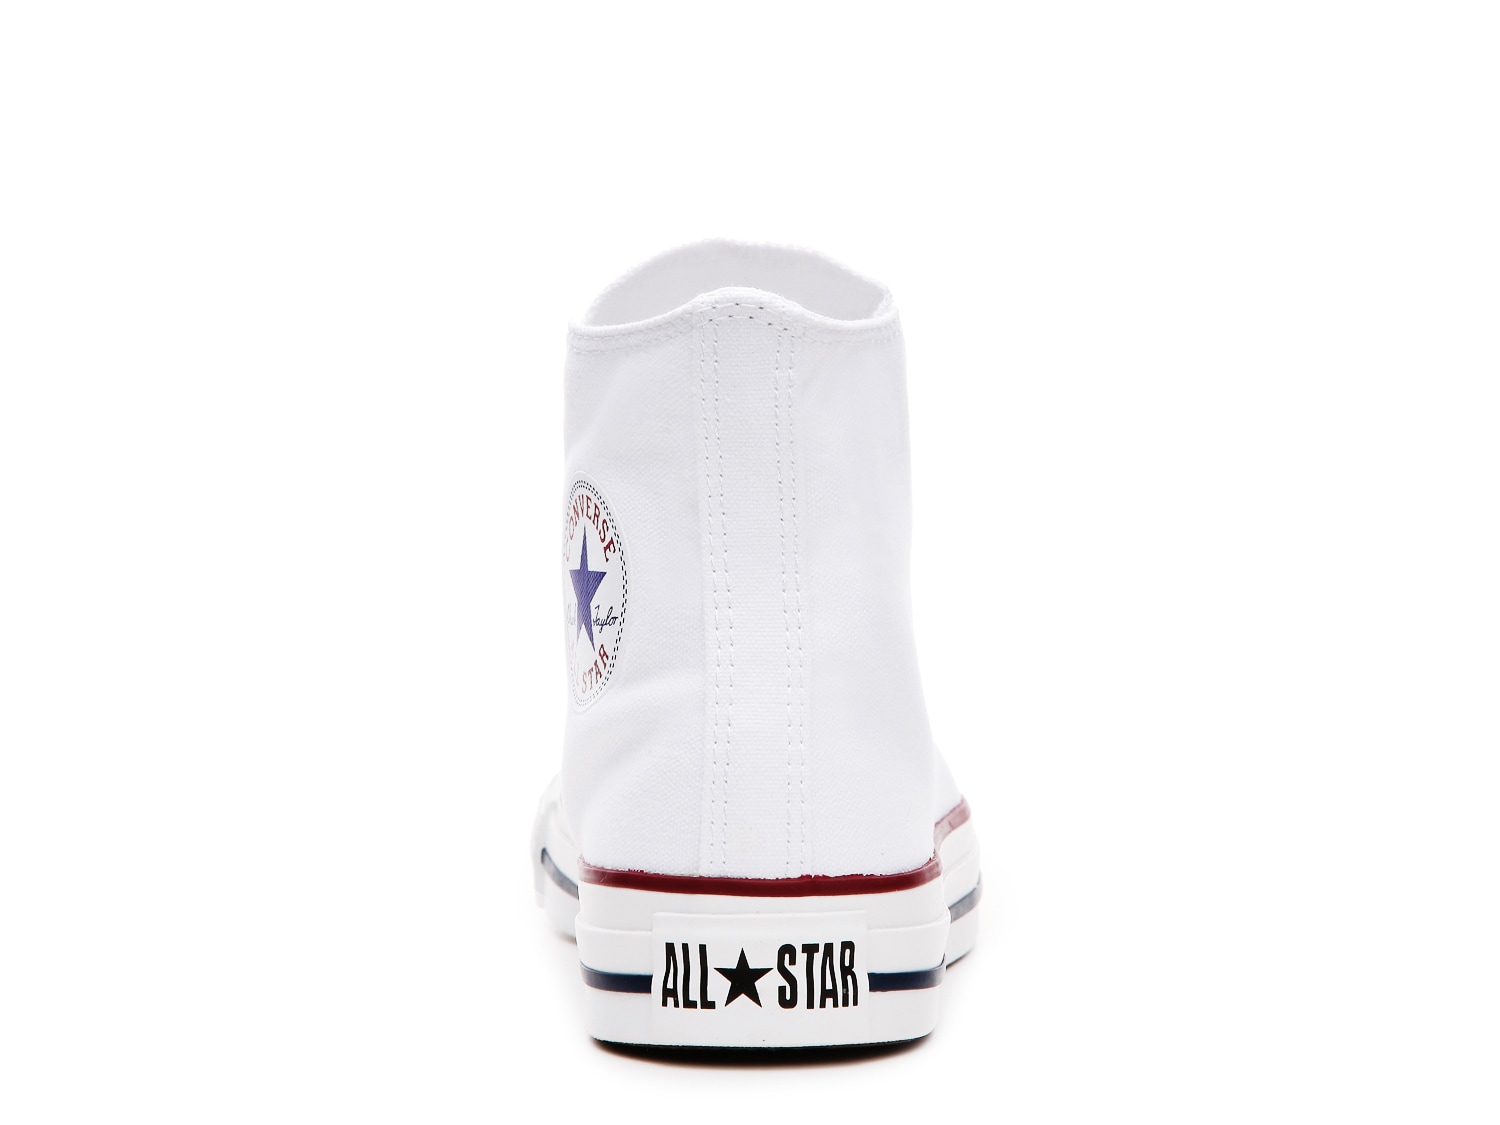 dsw white high top converse